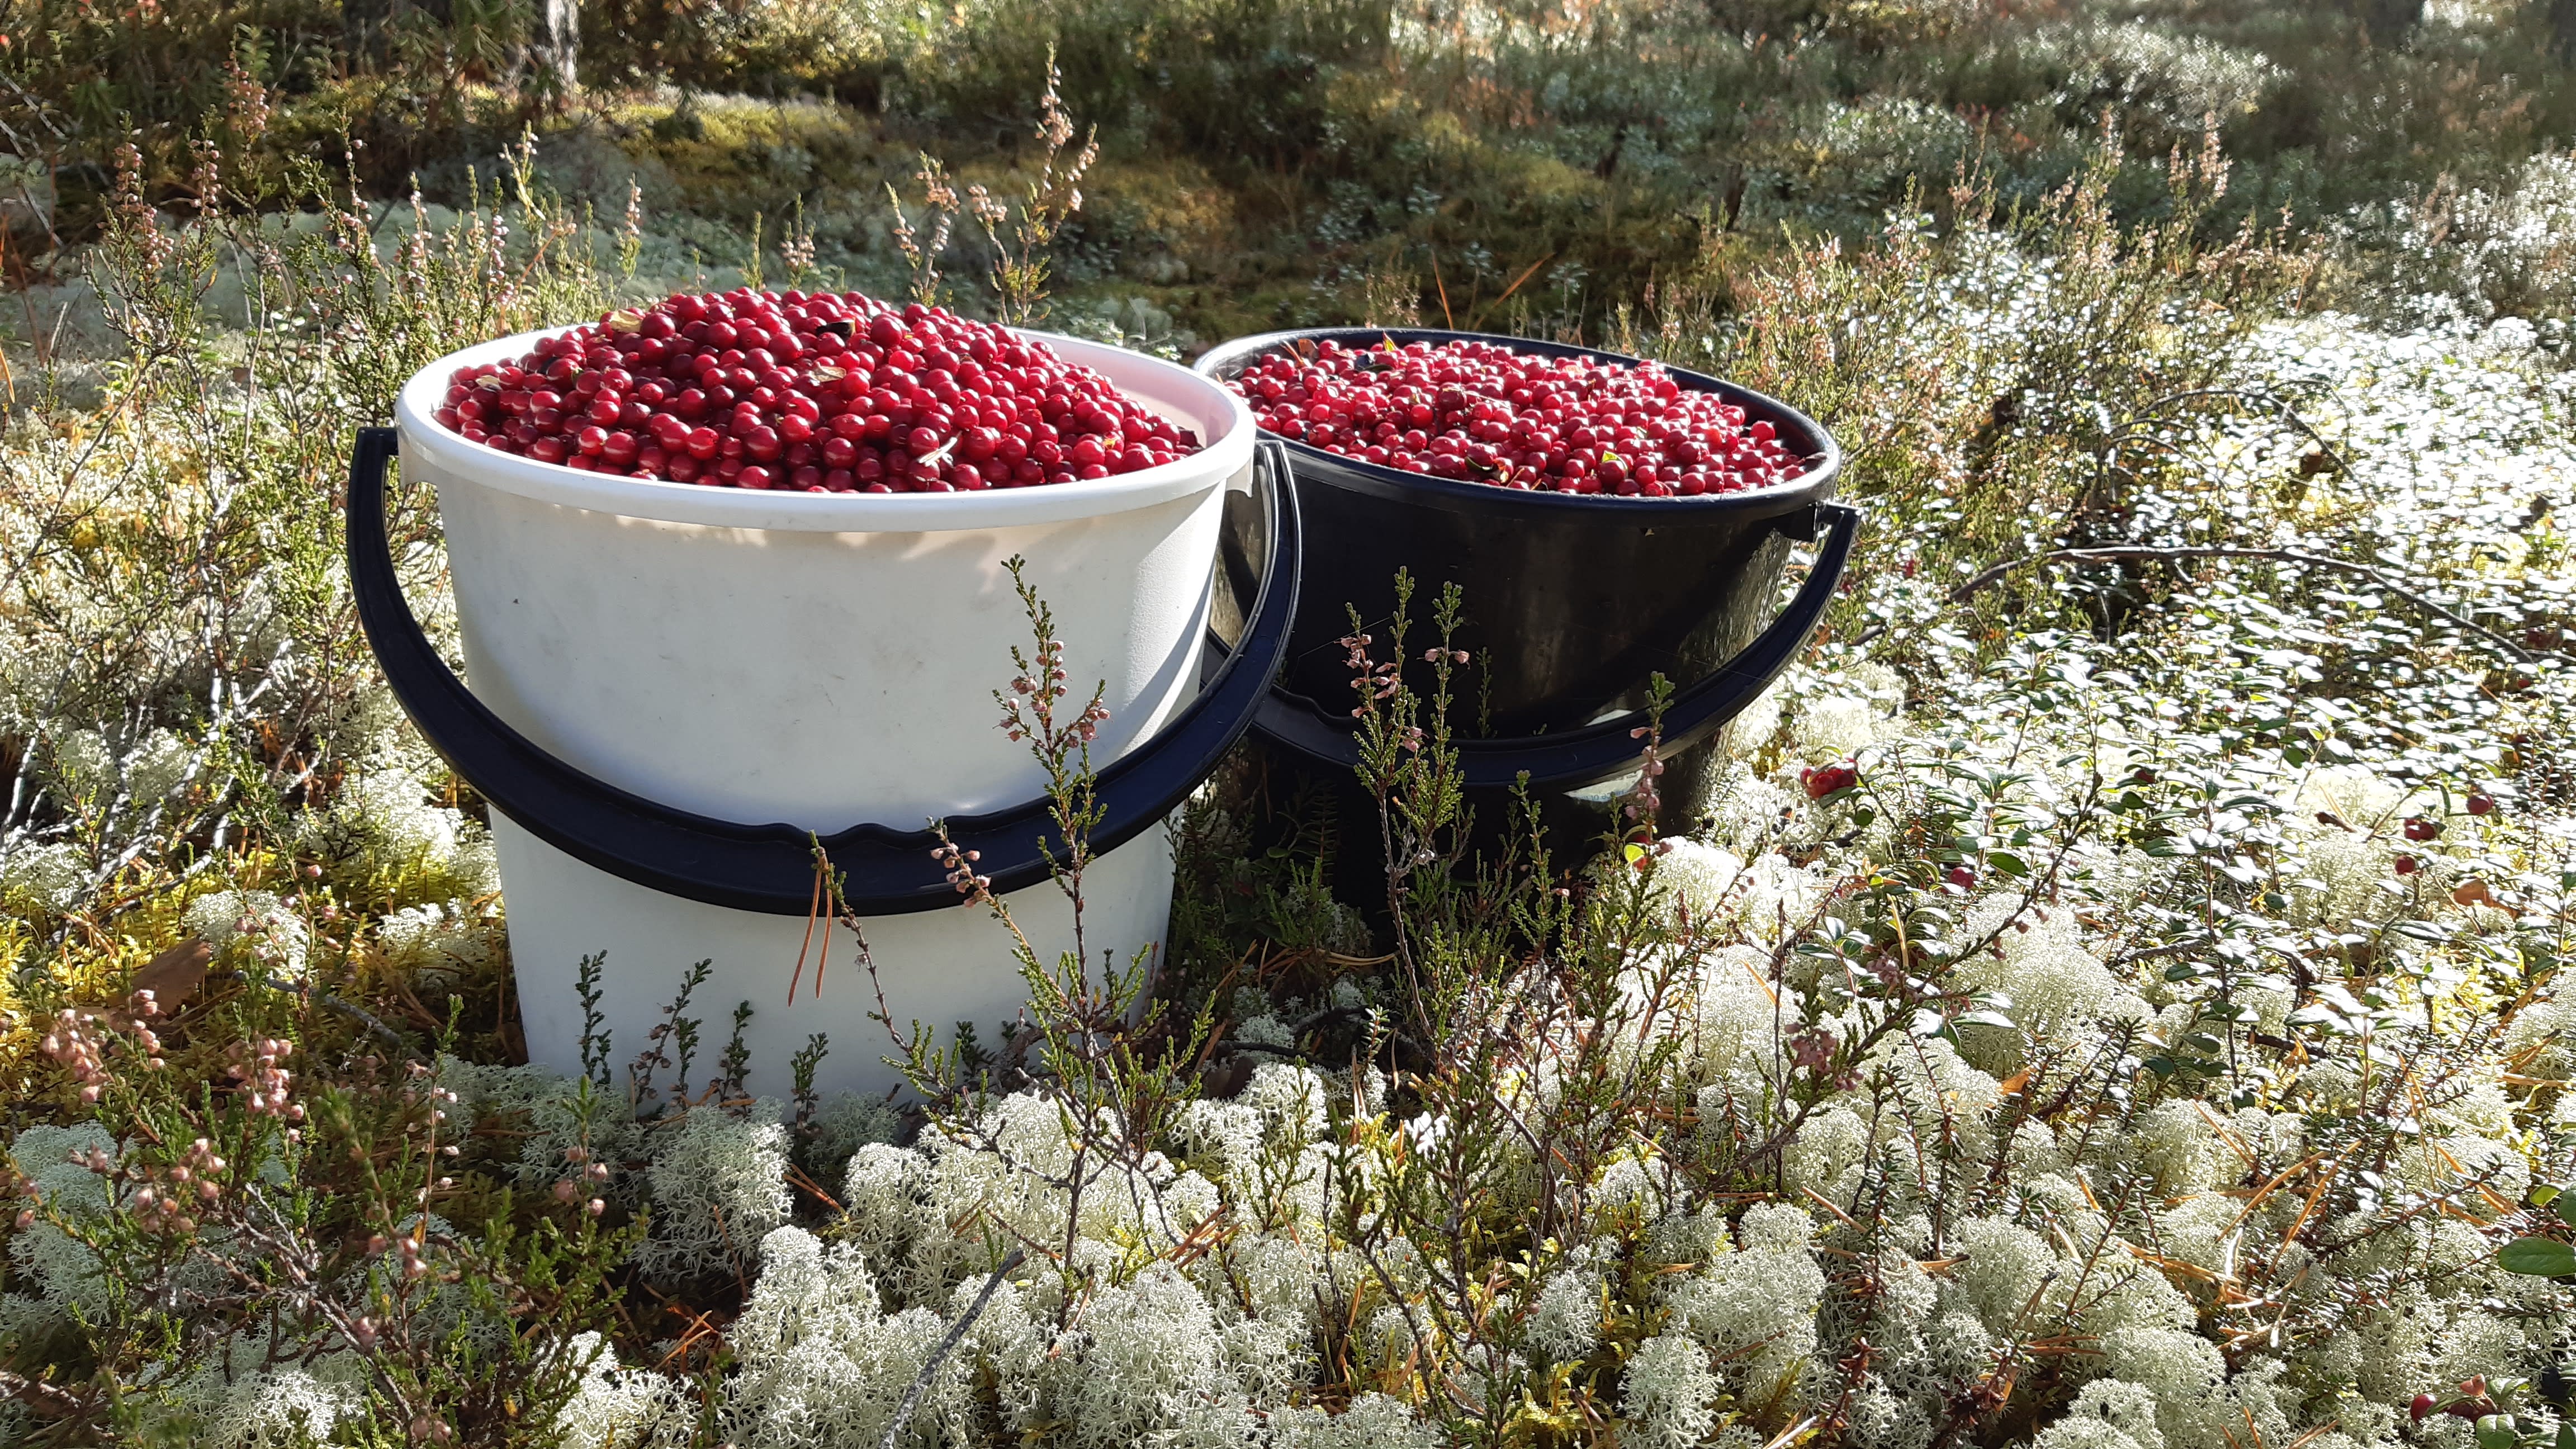 Lapland’s berry company that operates without a license